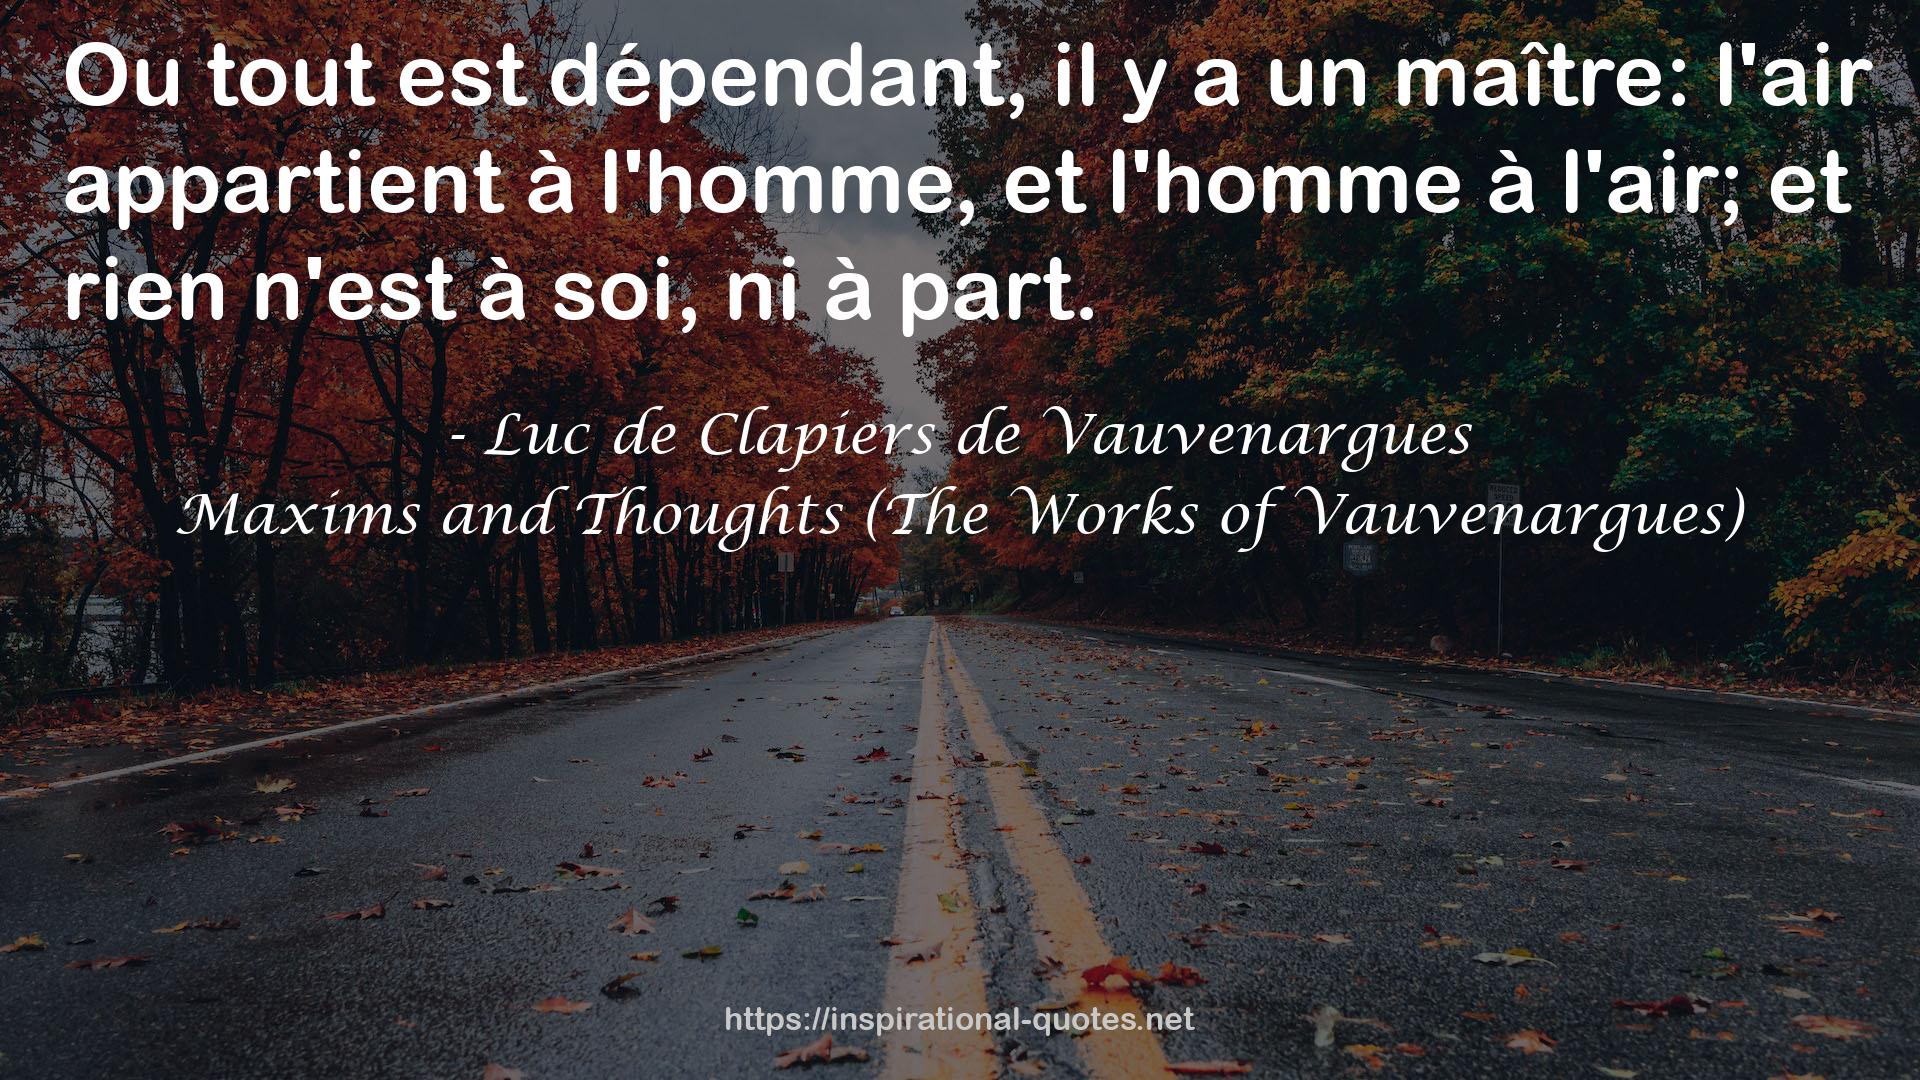 Maxims and Thoughts (The Works of Vauvenargues) QUOTES